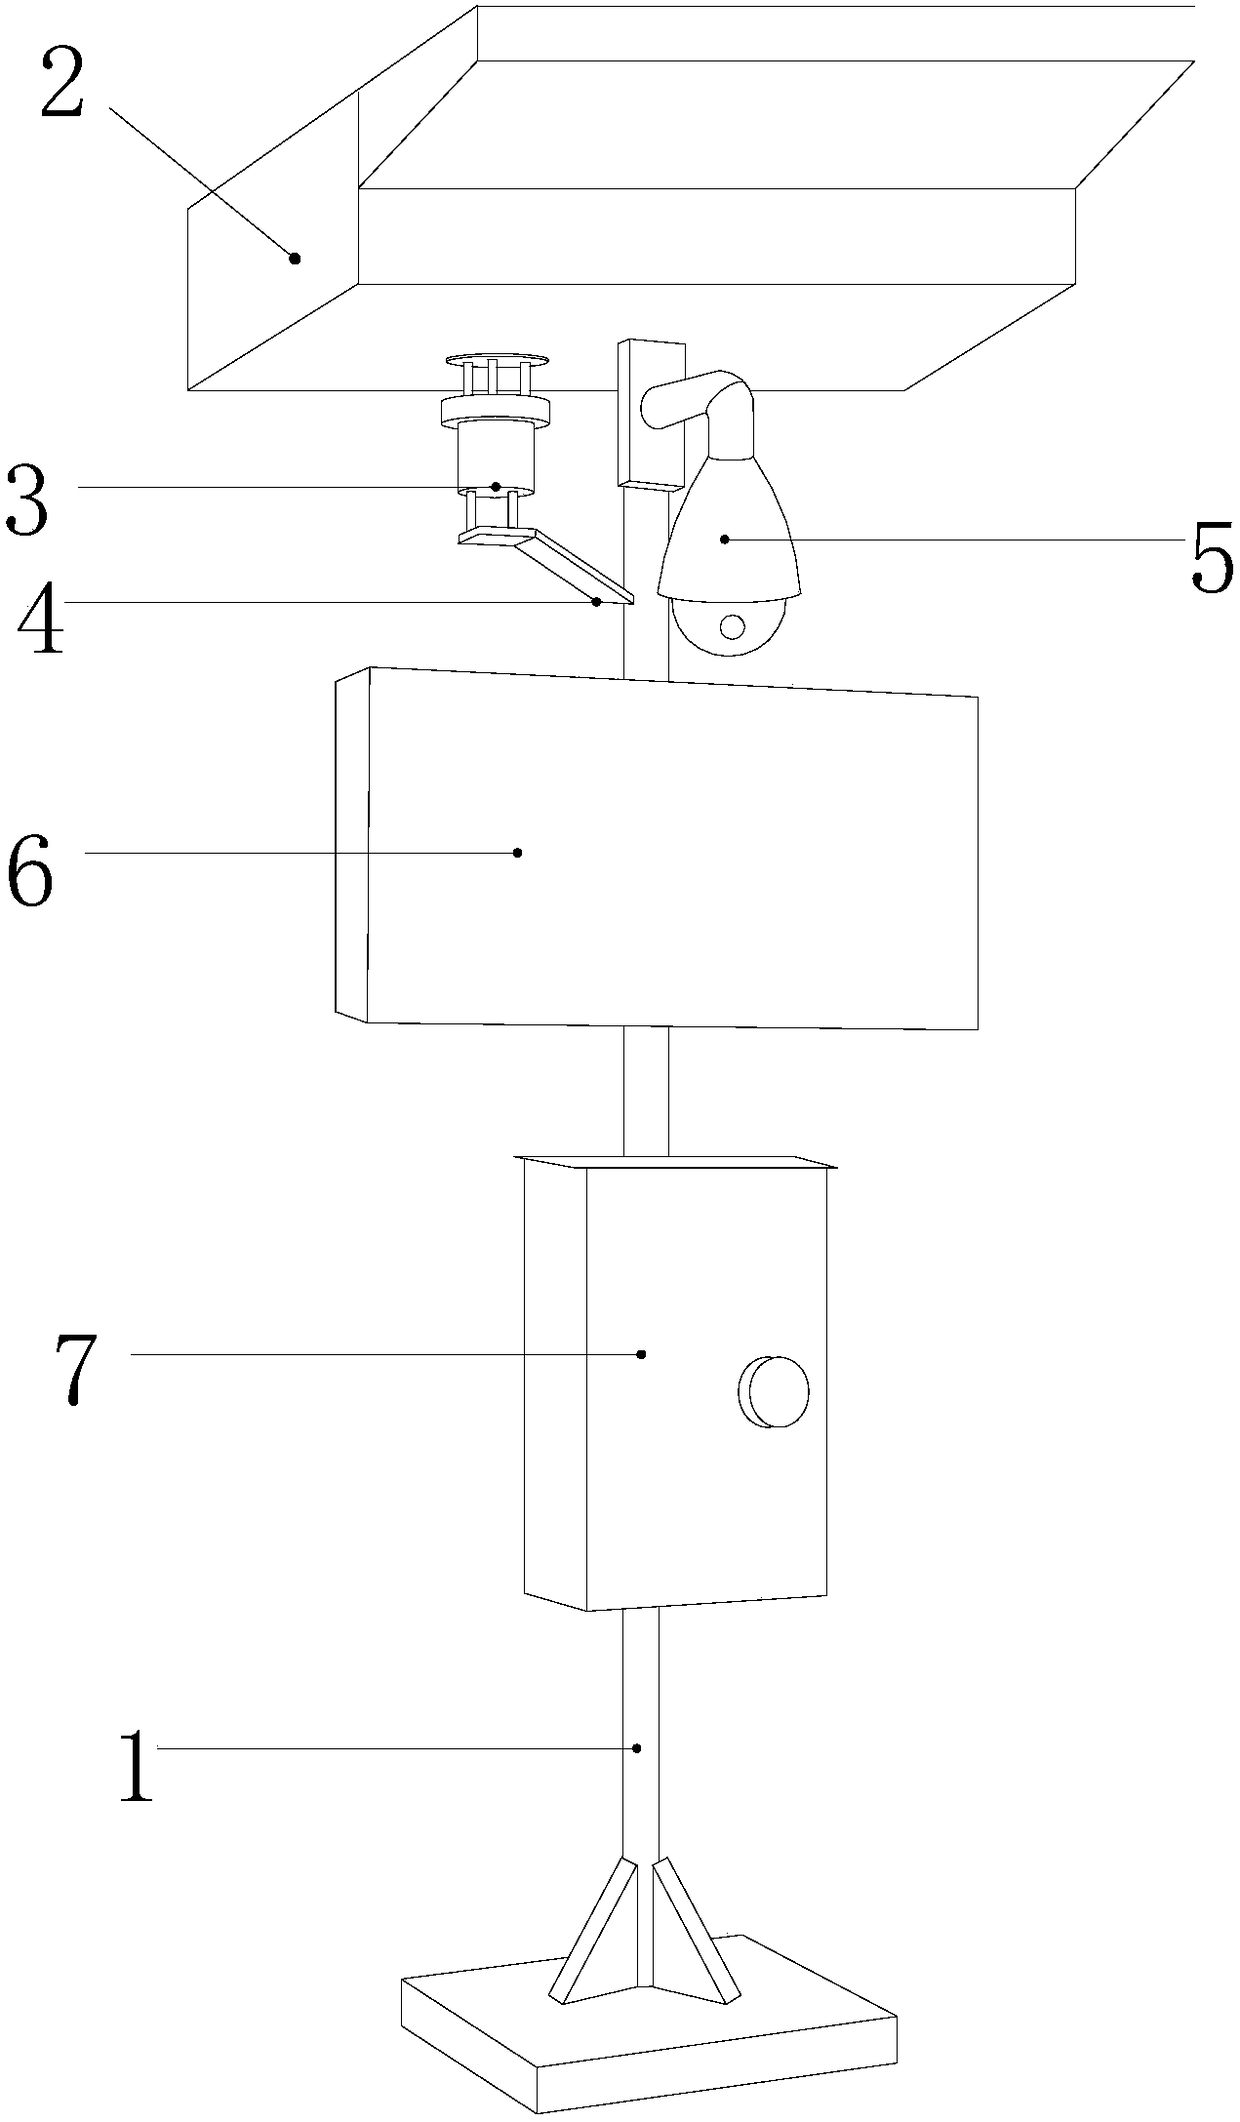 Dust-raising monitoring device for building monitoring